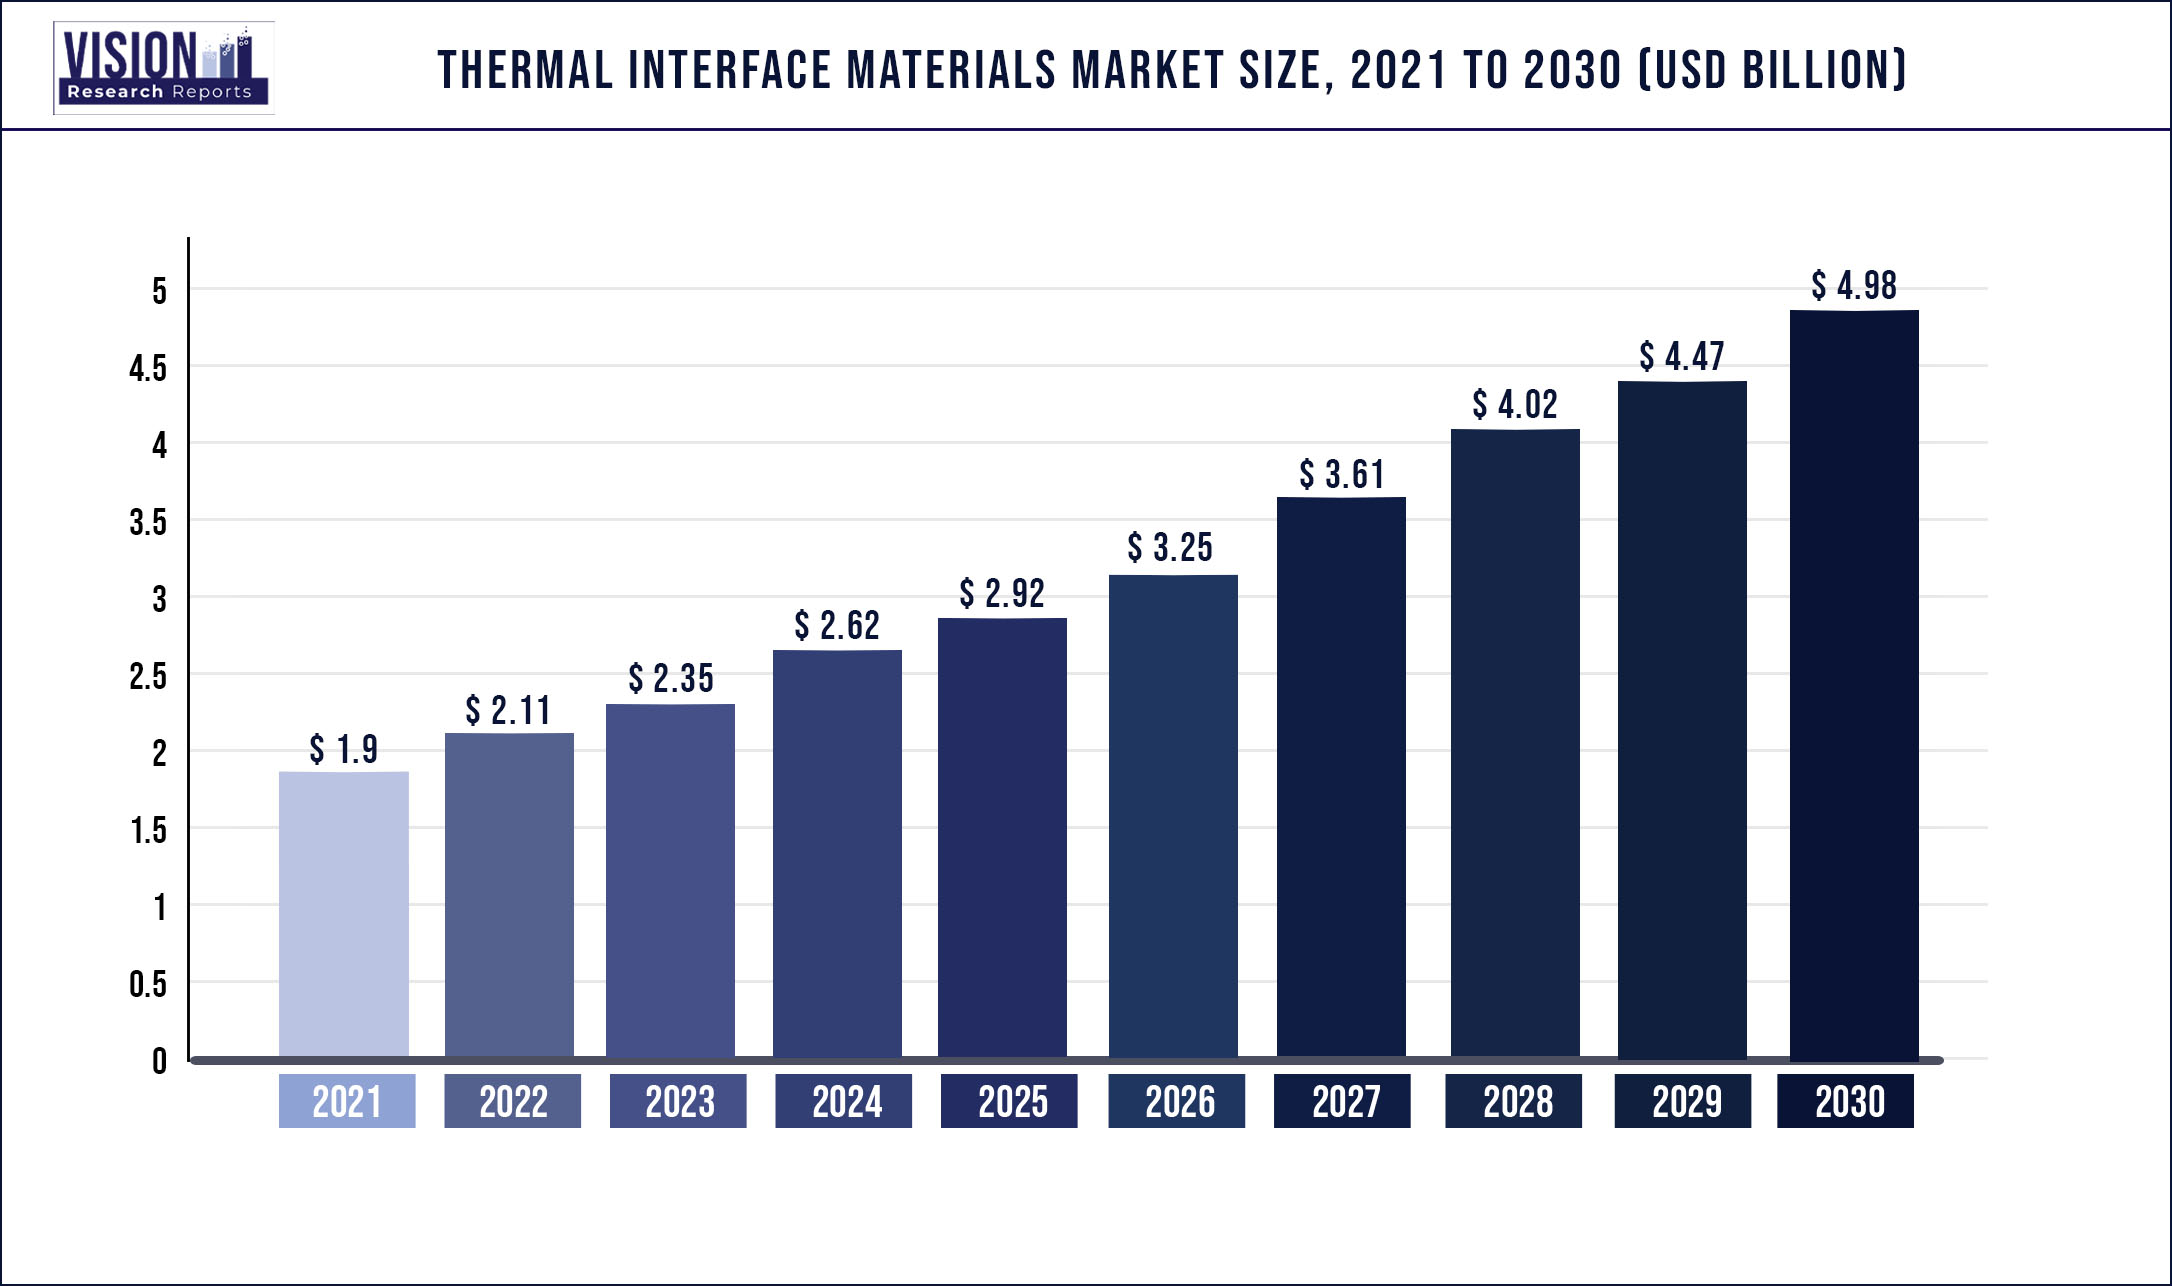 Thermal Interface Materials Market Size 2021 to 2030